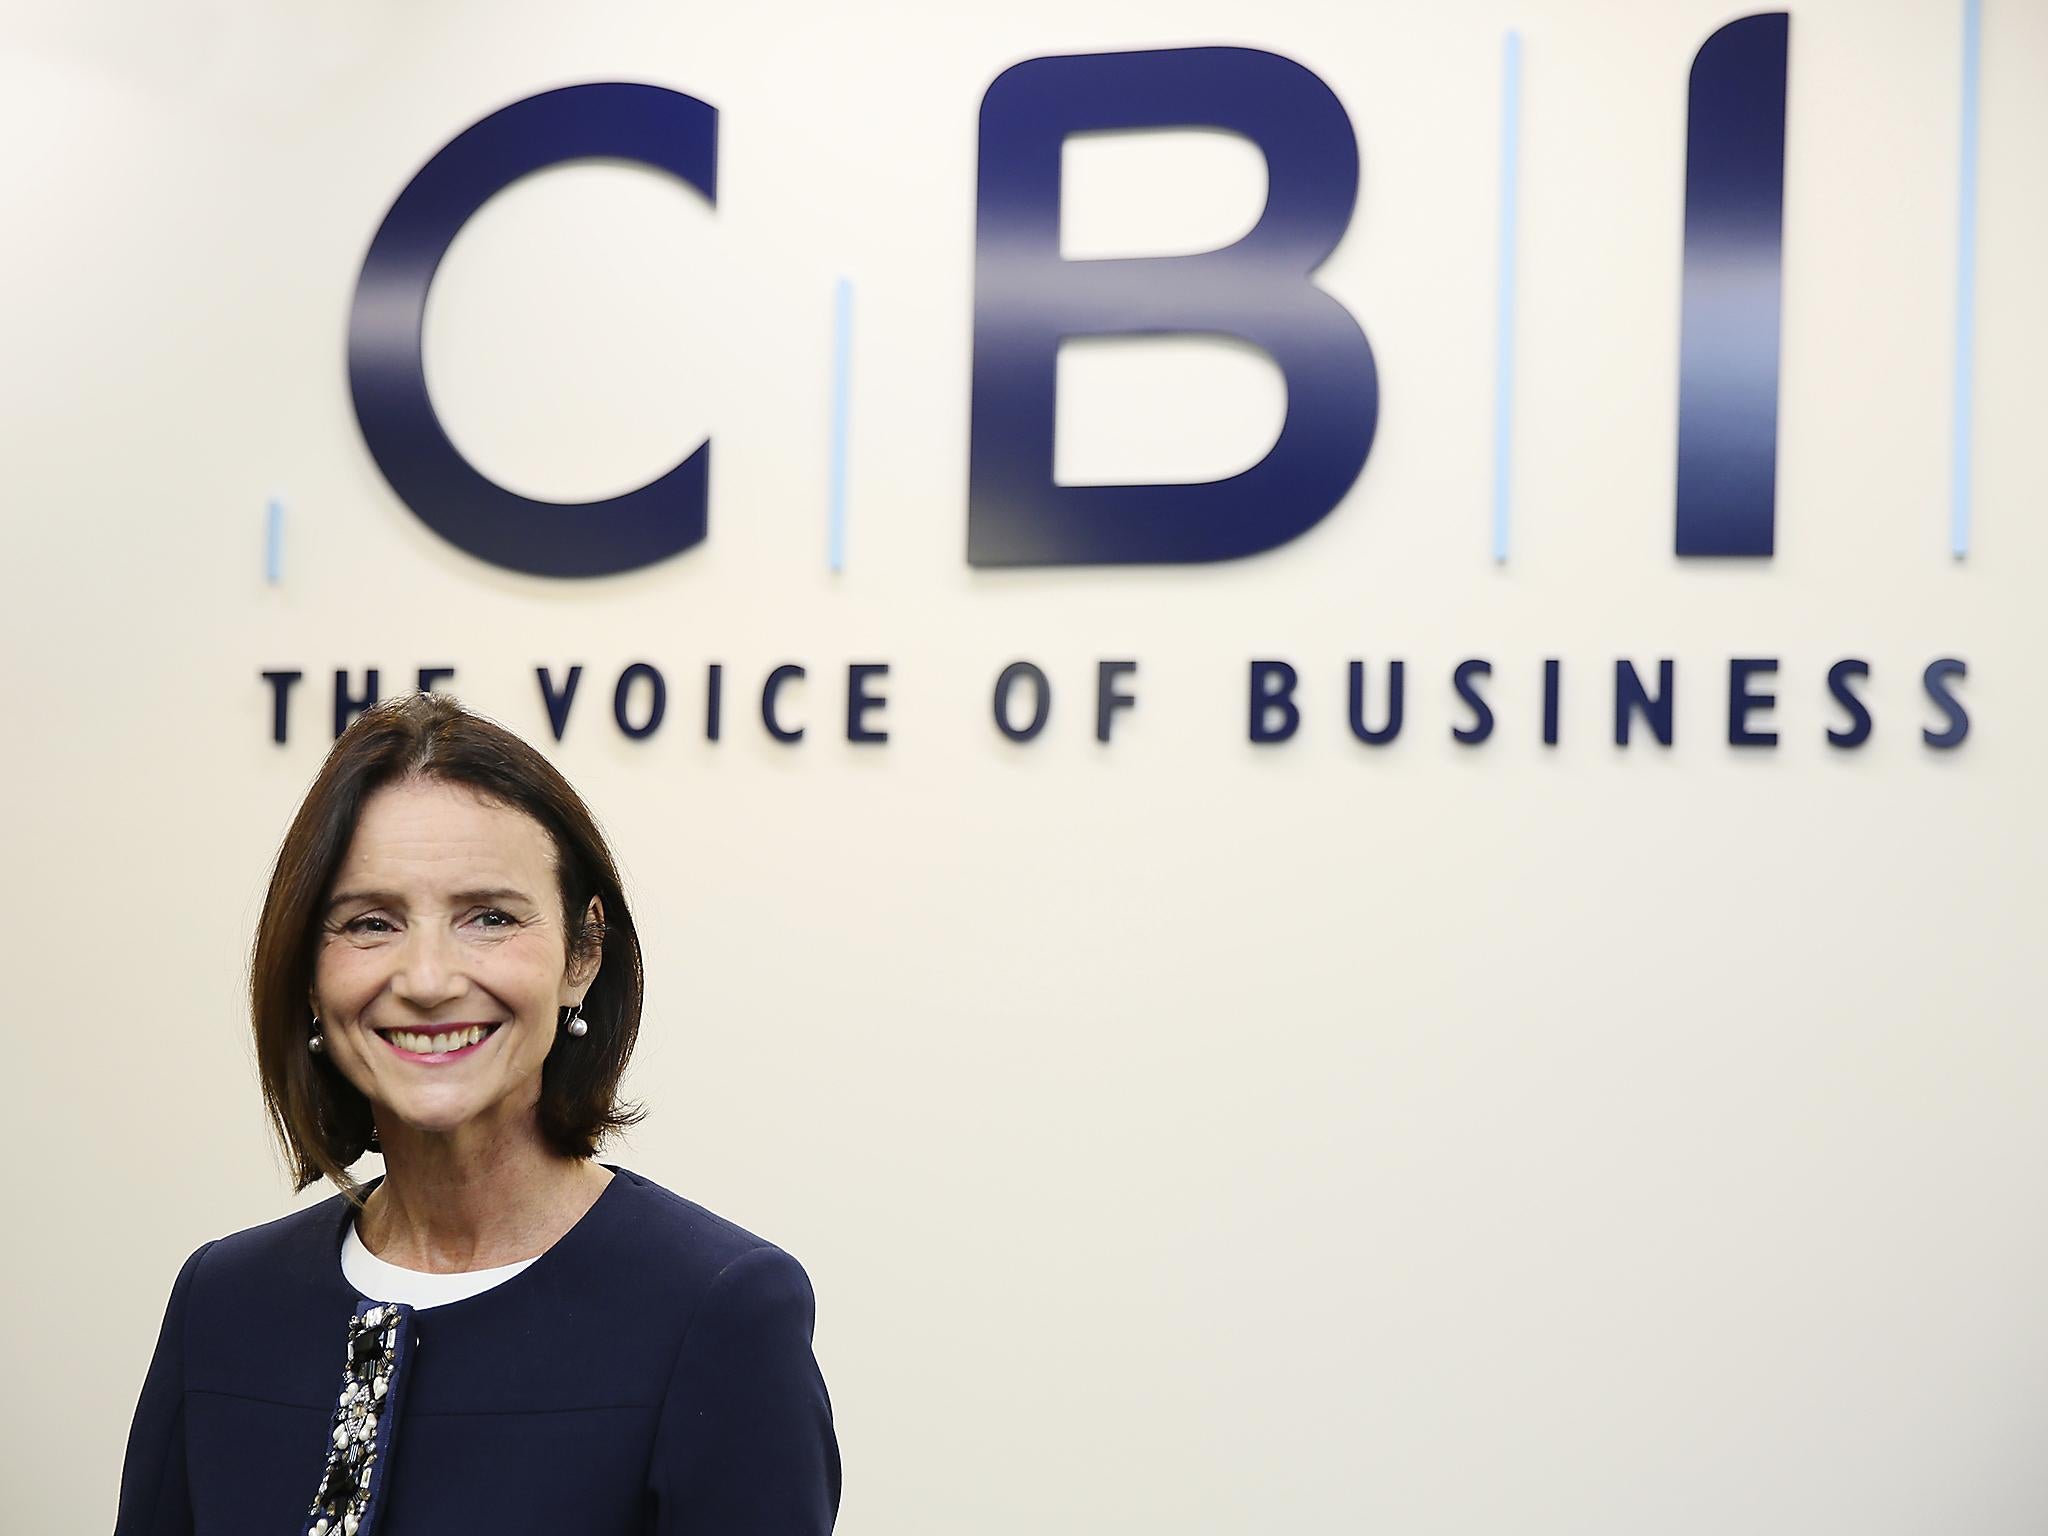 CBI head Carolyn Fairbairn urged the Government to invest in infrastructure and research and development in a letter to Chancellor Philip Hammond